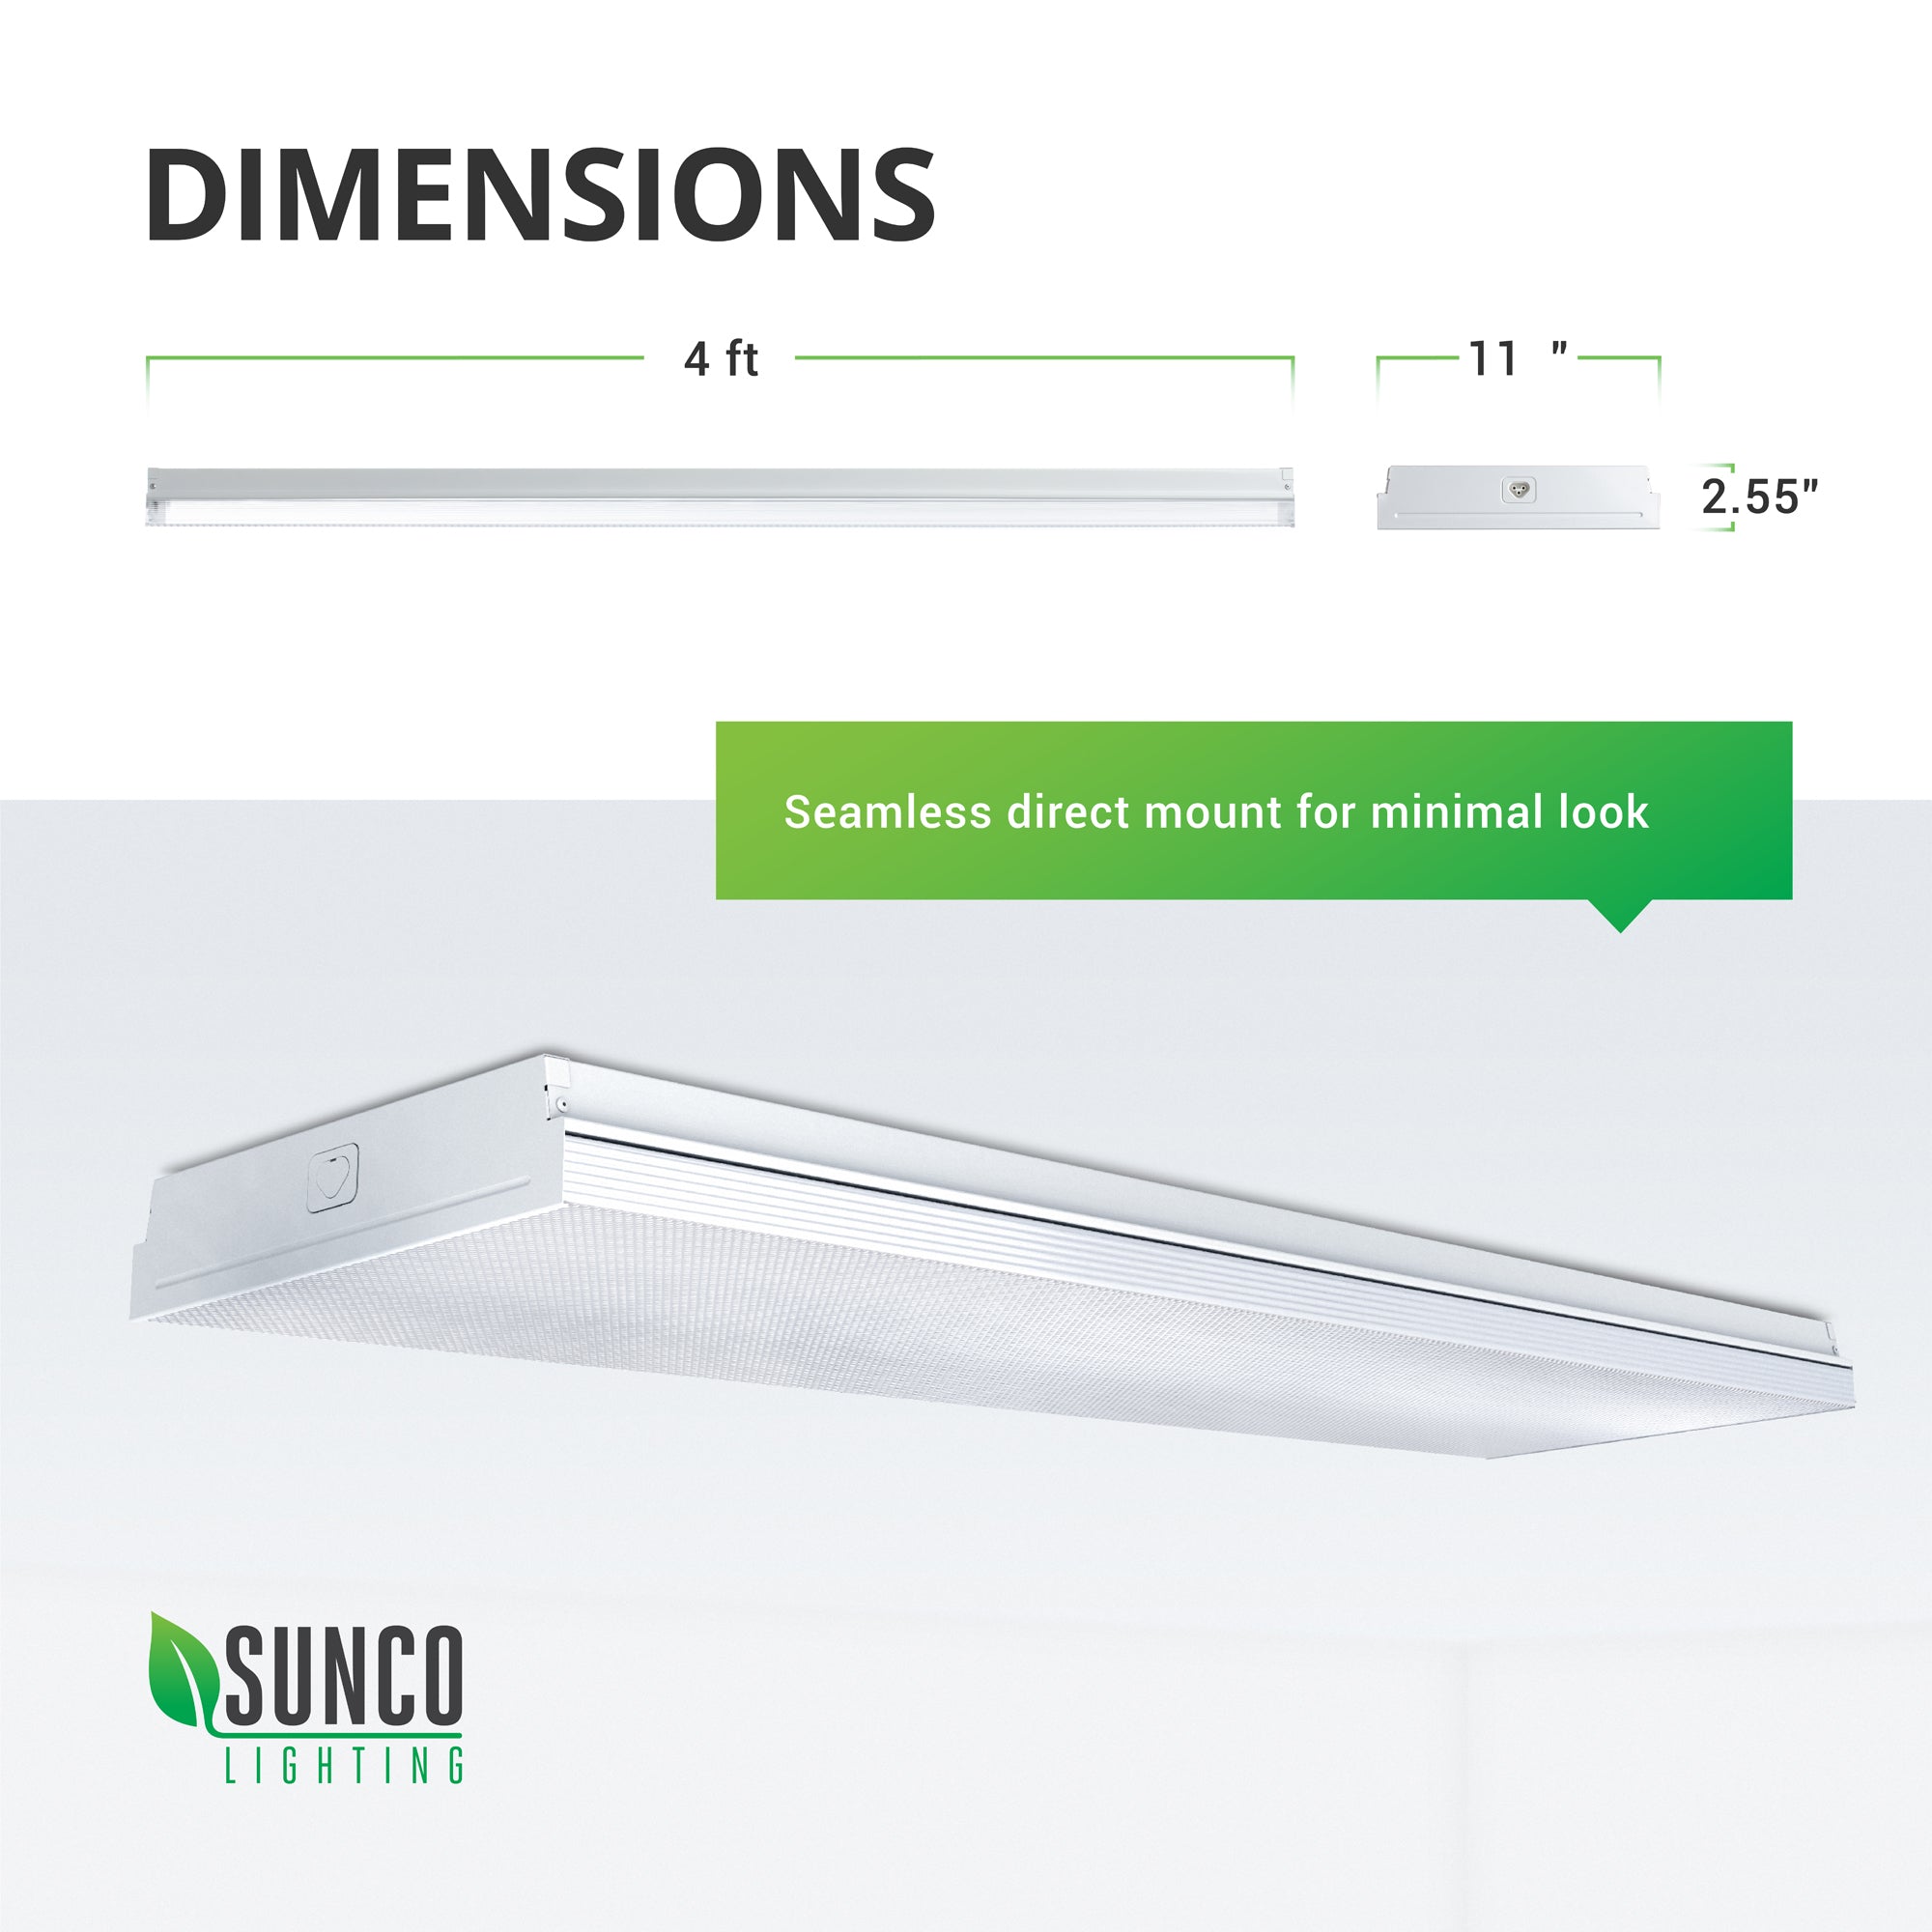 Dimensions of the wet rated Sunco 11-inch Prisma Wraparound LED Shop Light include: 4ft length, 11-inch width, 2.55-inch height. Image shows the seamless, minimal look of the surface mounted LED light fixture against a ceiling. Simply direct mount to your J-box to install.